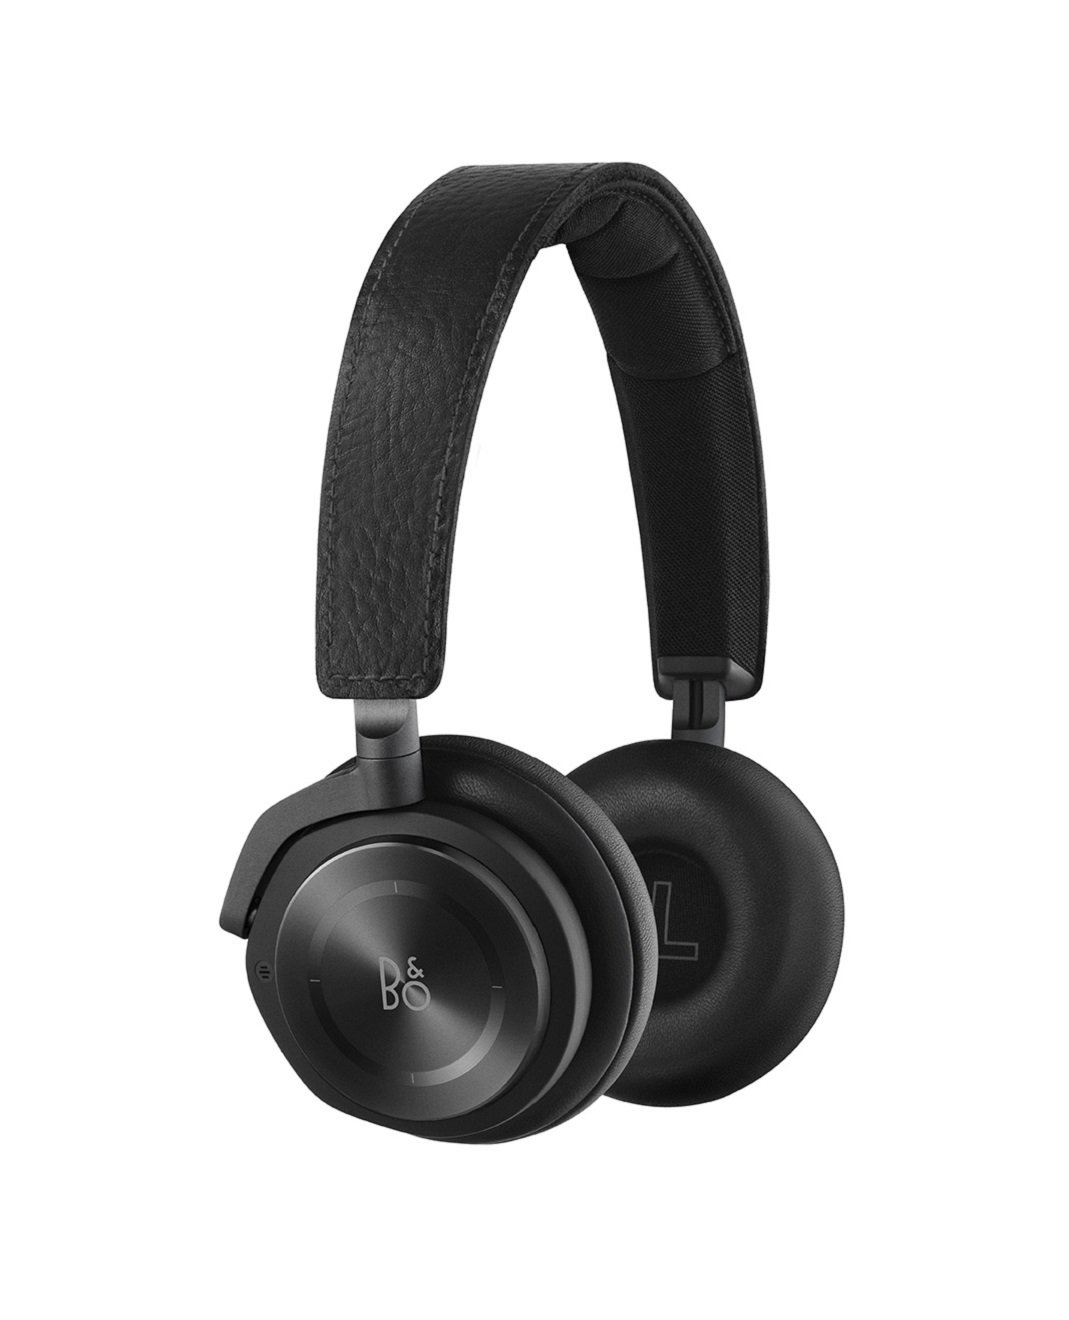 Bang & Olufsen Beoplay H8 Aluminum Touch Interface Headphones